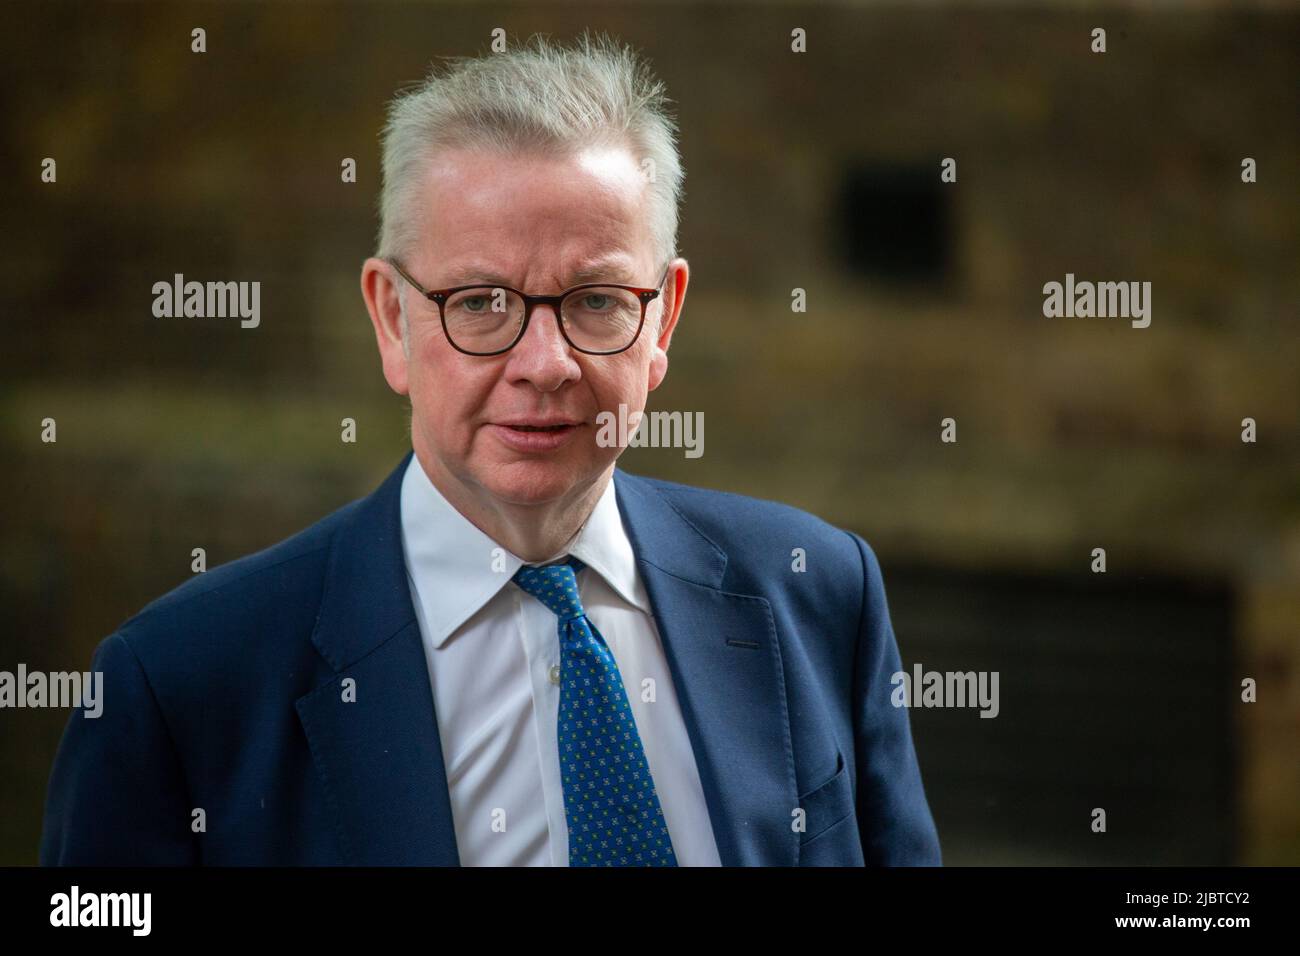 London, England, UK. 8th June, 2022. Secretary of State for Housing, Communities and Local Government MICHAEL GOVE is seen outside 10 Downing Street. (Credit Image: © Tayfun Salci/ZUMA Press Wire) Stock Photo